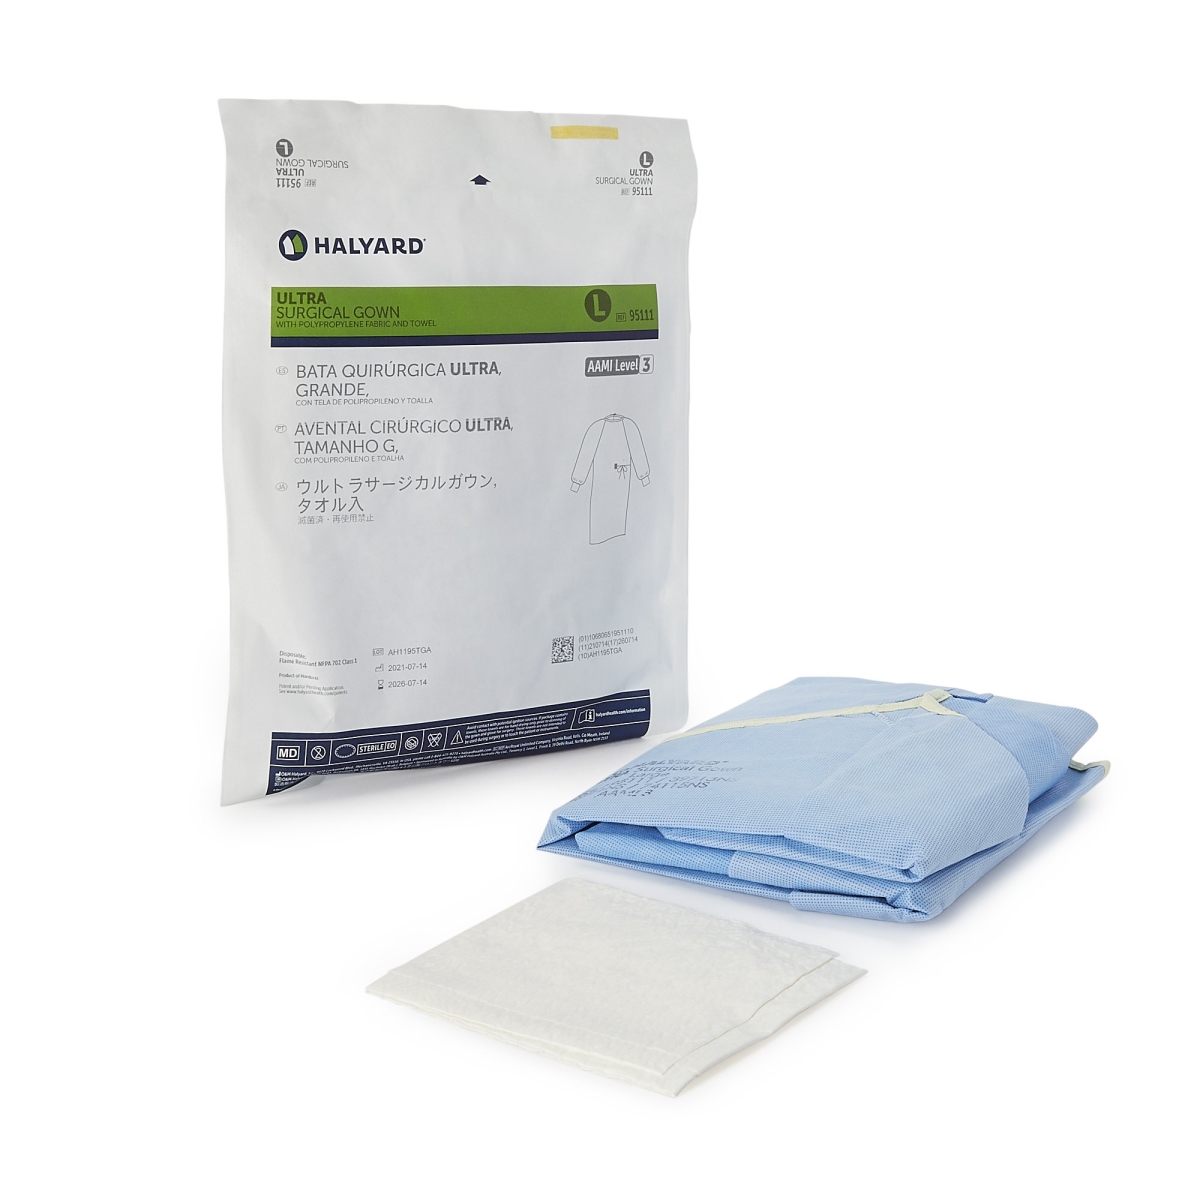 217165-CS Ultra Non-Reinforced Surgical Gown with Towel - Pack of 32 -  O&M Halyard, 217165_CS